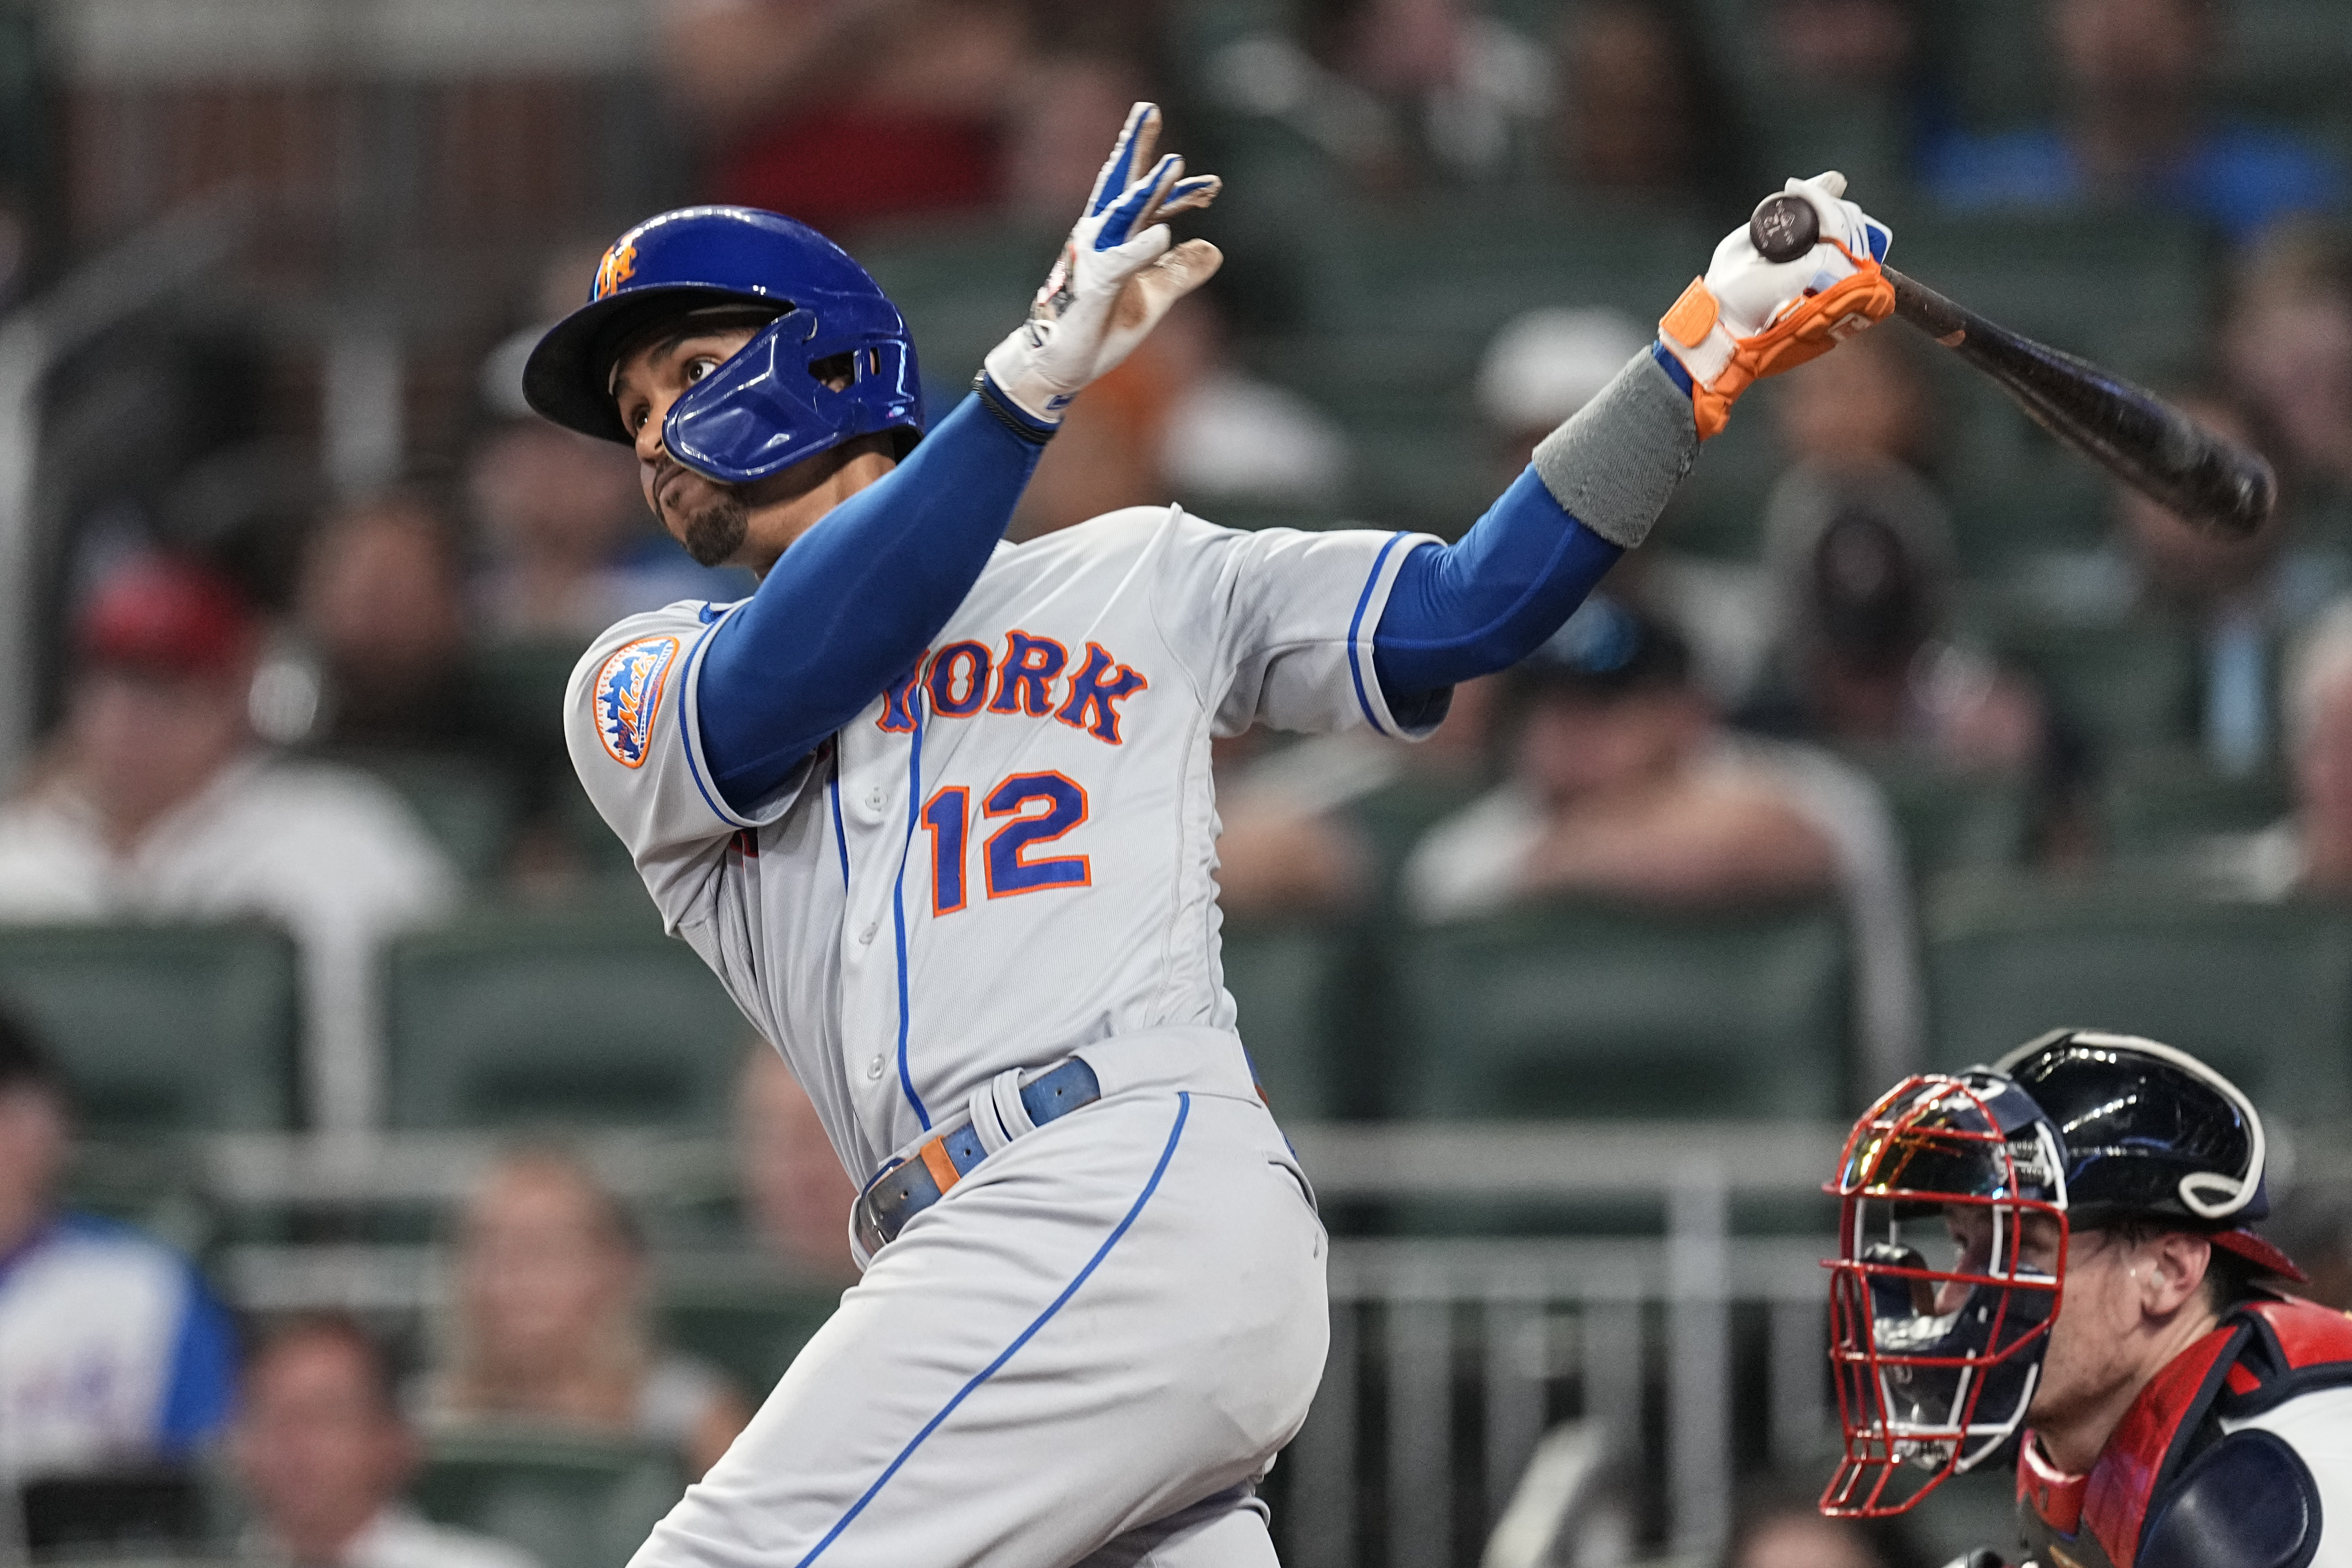 Mets launch 3 homers to beat MLB-leading Braves 10-4 for 7th win in 9 games